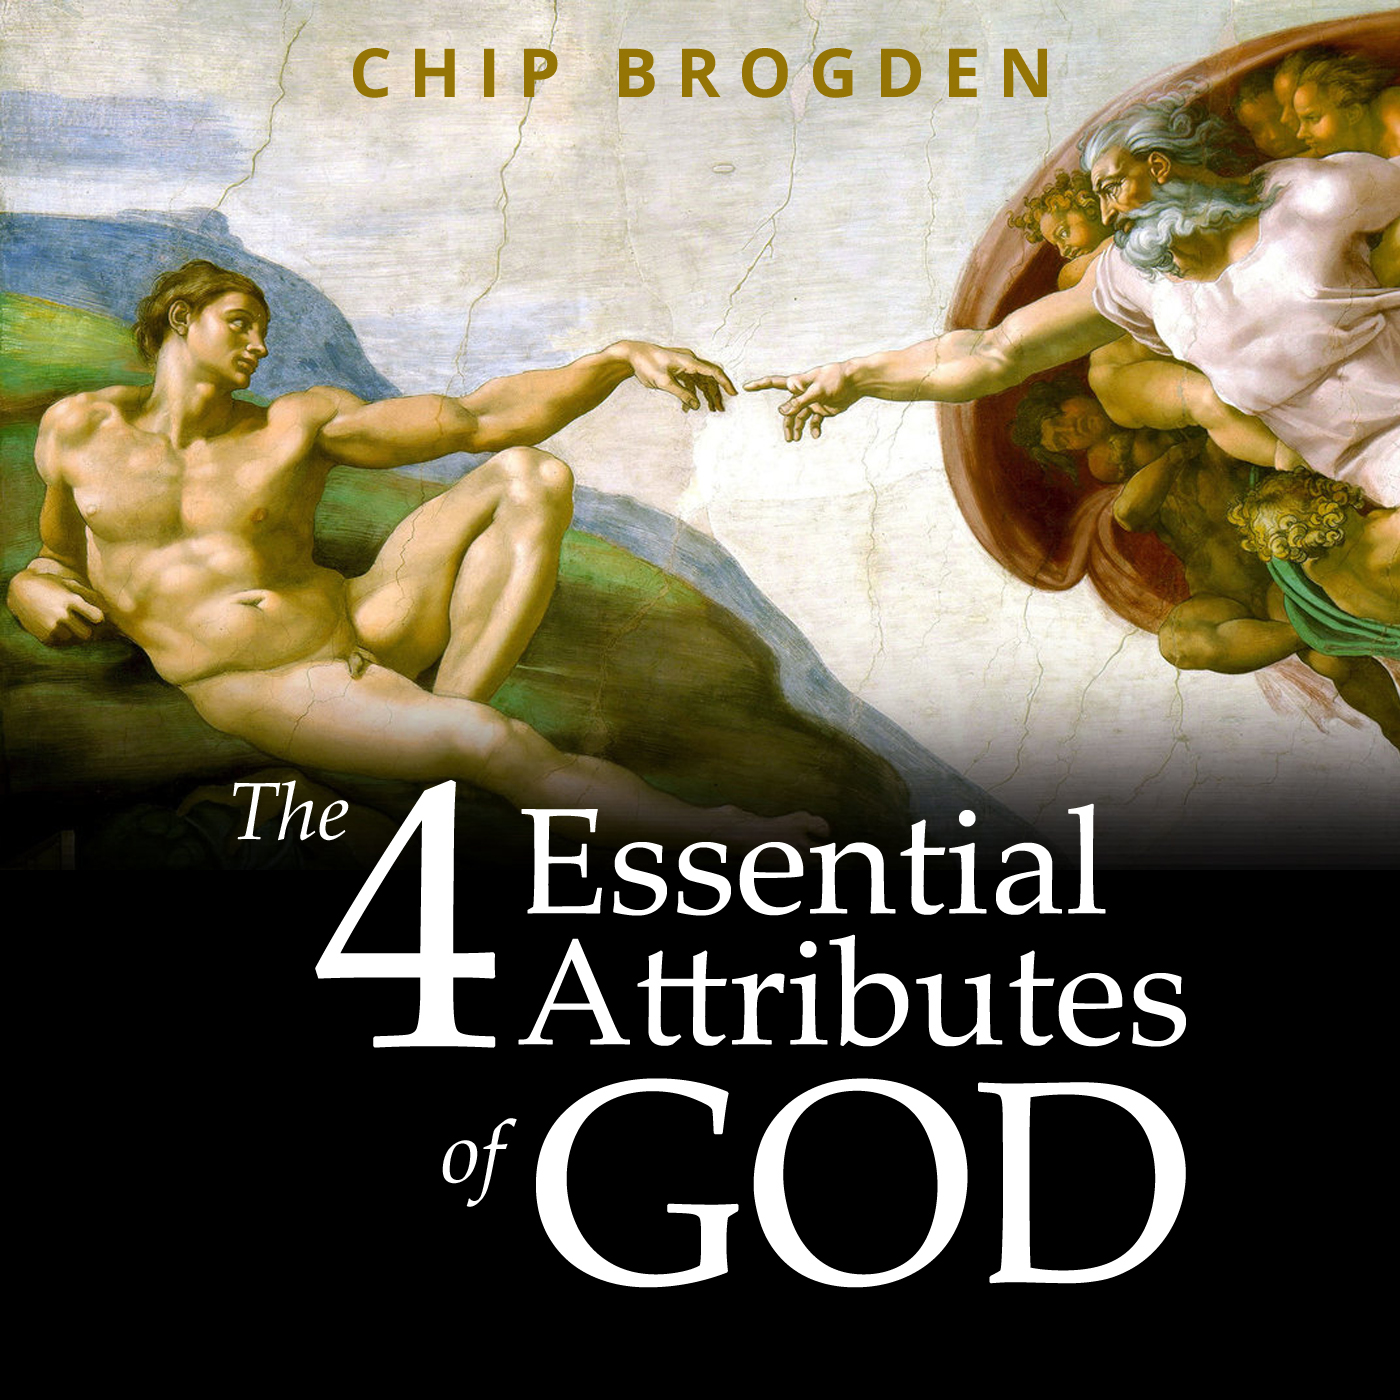 The 4 Essential Attributes of God